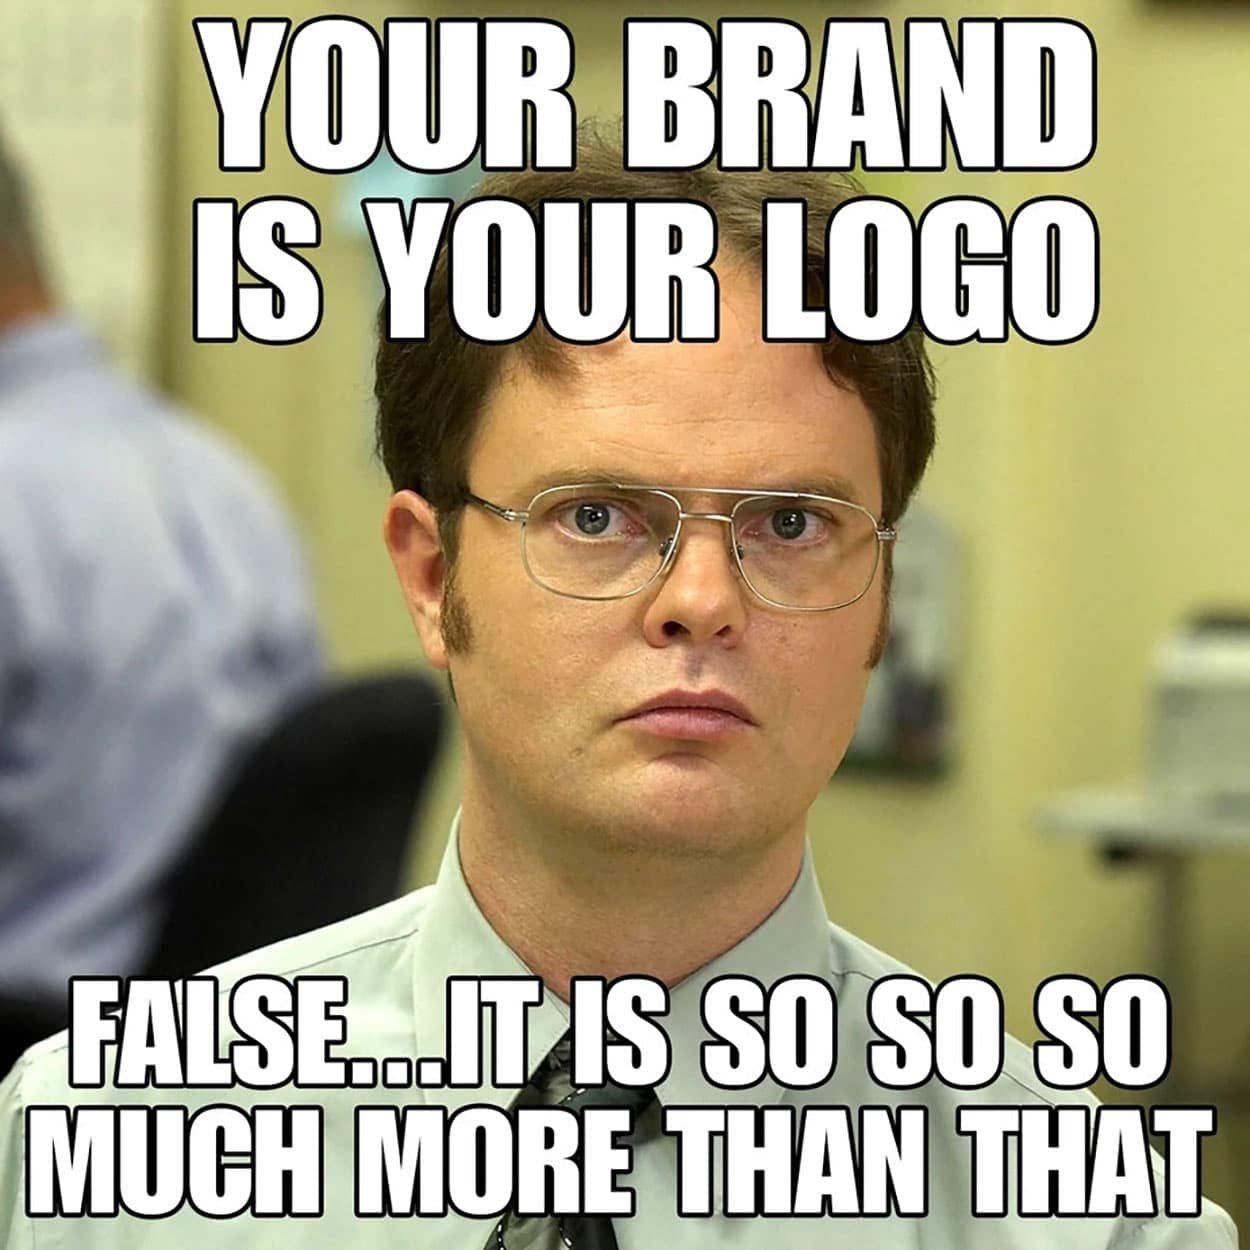 Your brand is your logo